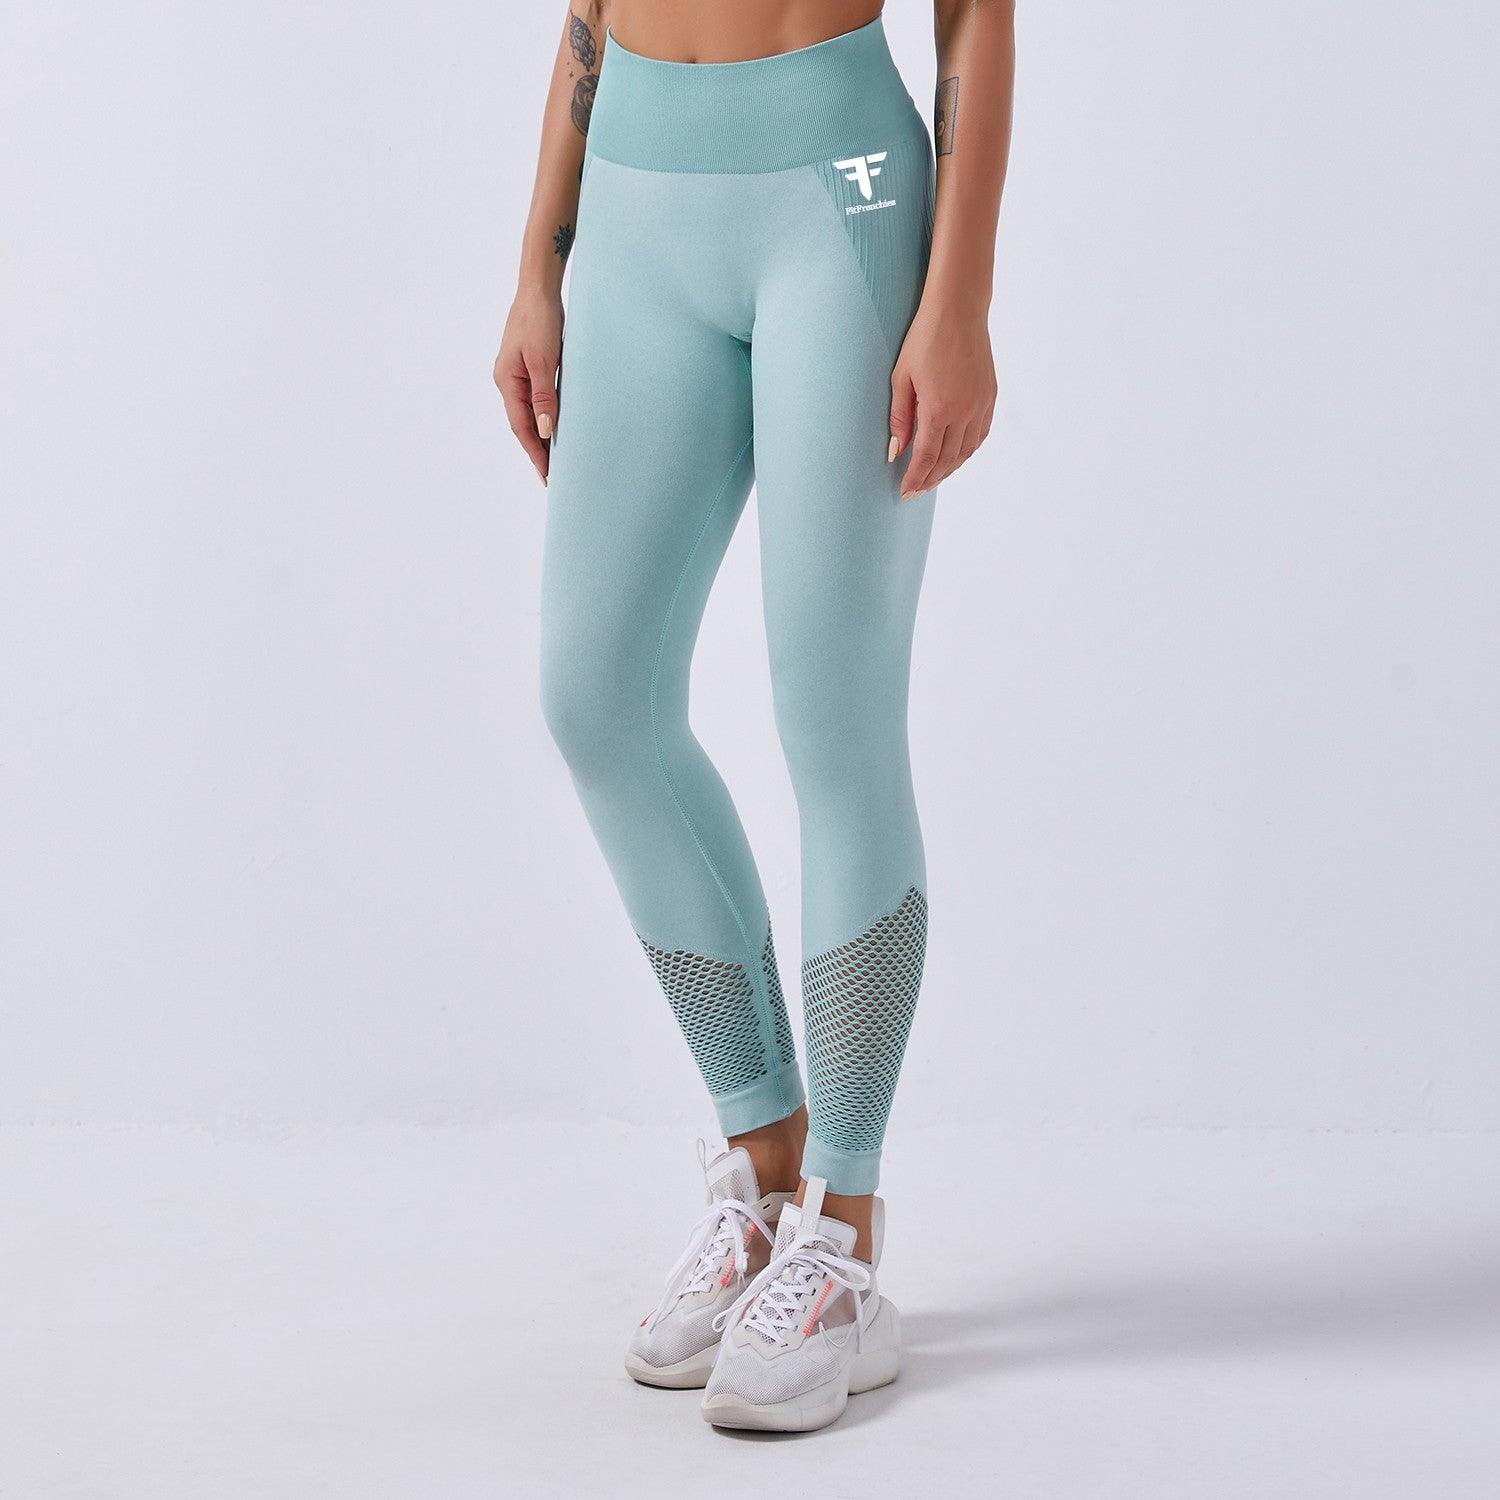 Legging Motion seamless - FITFRENCHIES